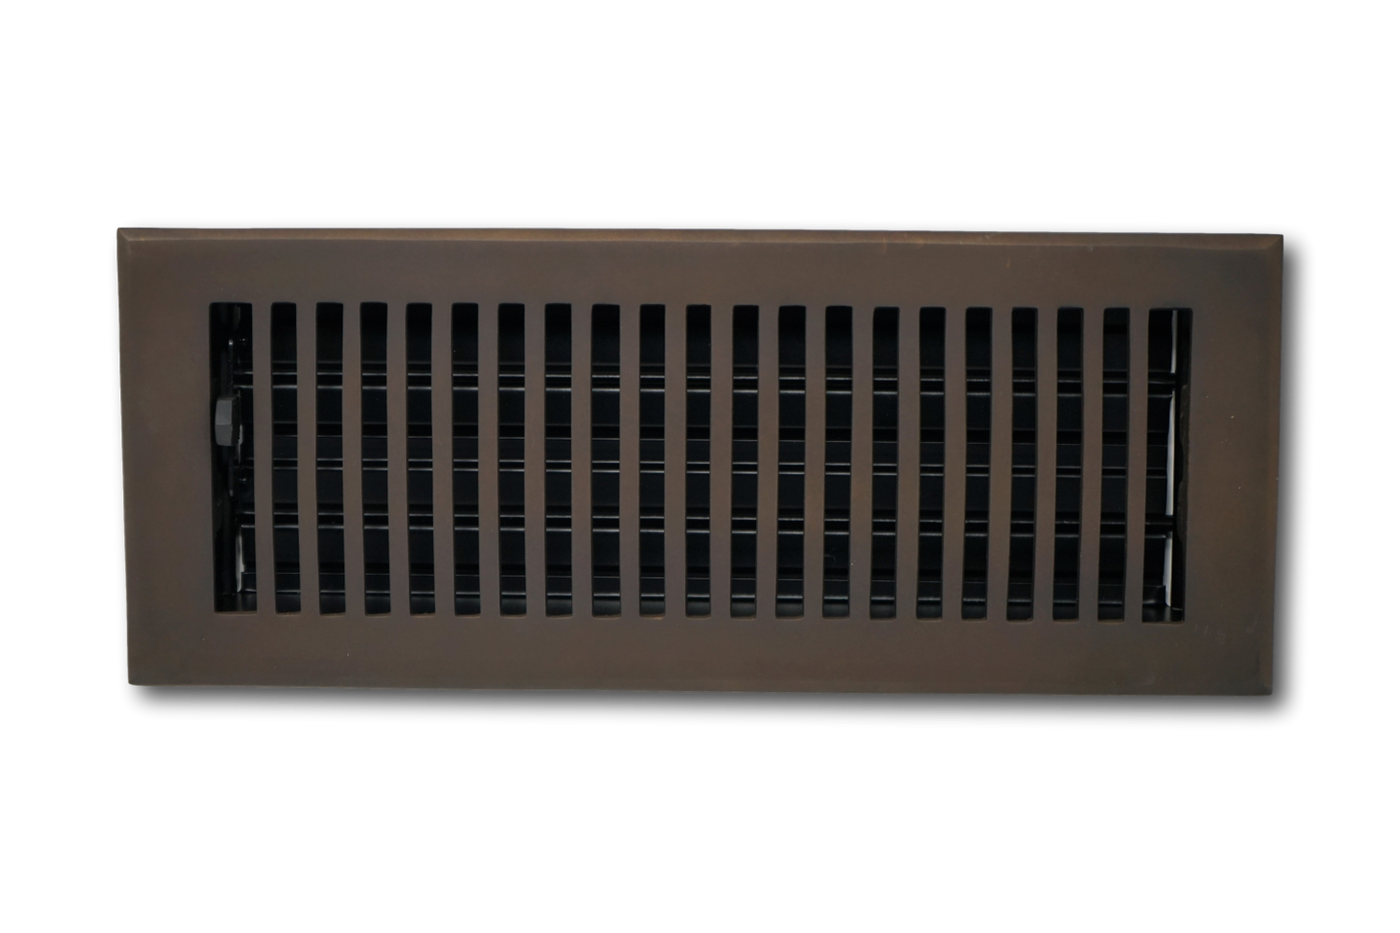 Cast Brass Contemporary Vent Covers - Oil Rubbed Bronze - 4" x 14" (Overall: 5-1/4" x 15-1/2")